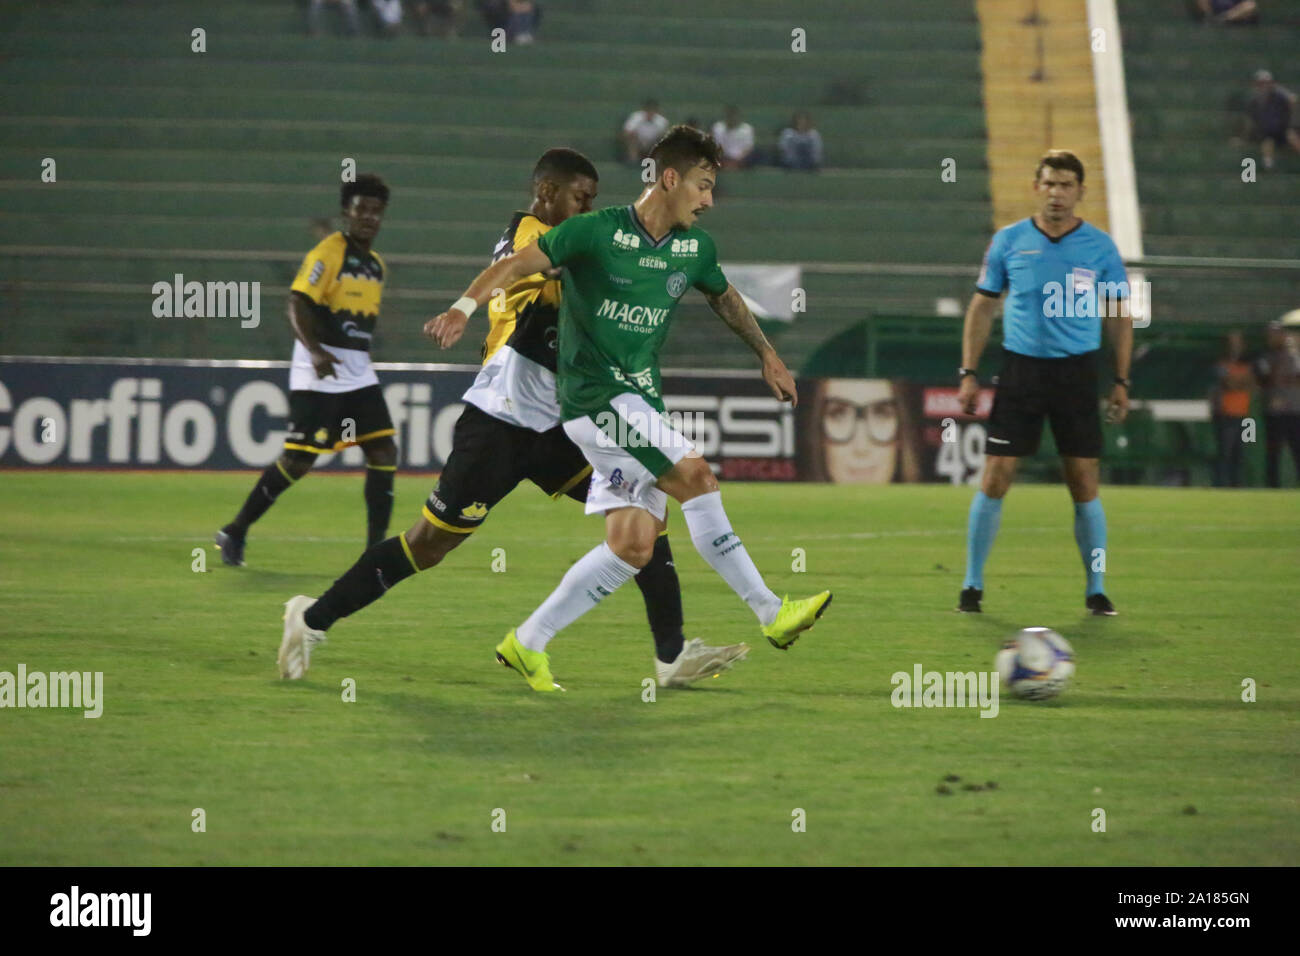 Campinas, Brazil. 24th Sep, 2019. Match of the match between the teams of Guarani and Criciuma, valid for the 24th round of the Brazilian Serie B Championship, held at Brinco de Ouro Stadium, Campinas, São Paulo, on Tuesday (24). In the photo Guarani player Arthur Rezende throws with Jean Mangabeira. Credit: Leandro Ferreira/FotoArena/Alamy Live News Stock Photo